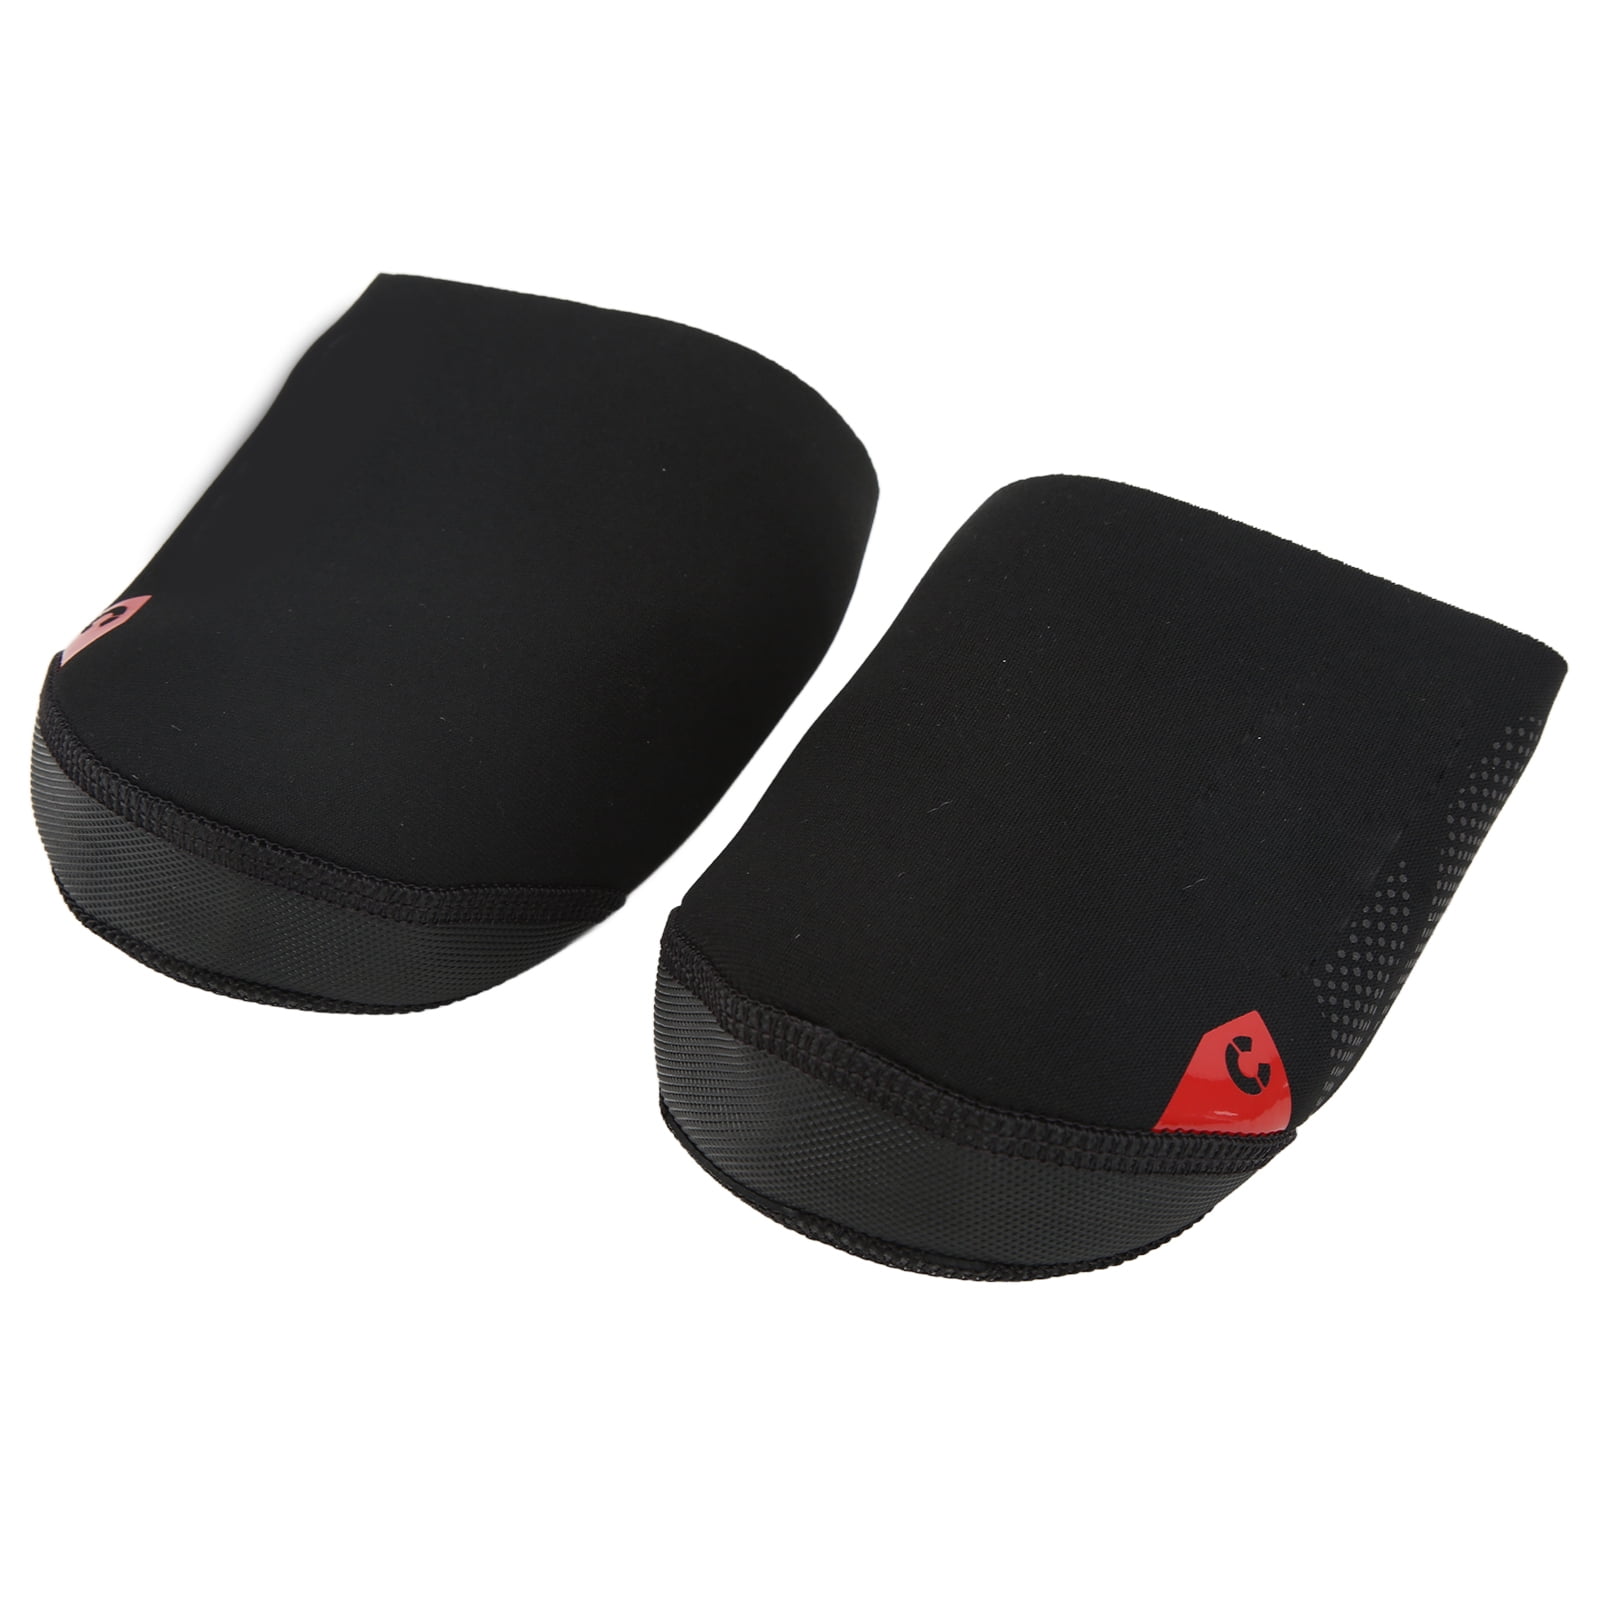 2pcs Outdoor Cycling Bike Bicycle Shoe Toe Covertector Overshoes Warmer 